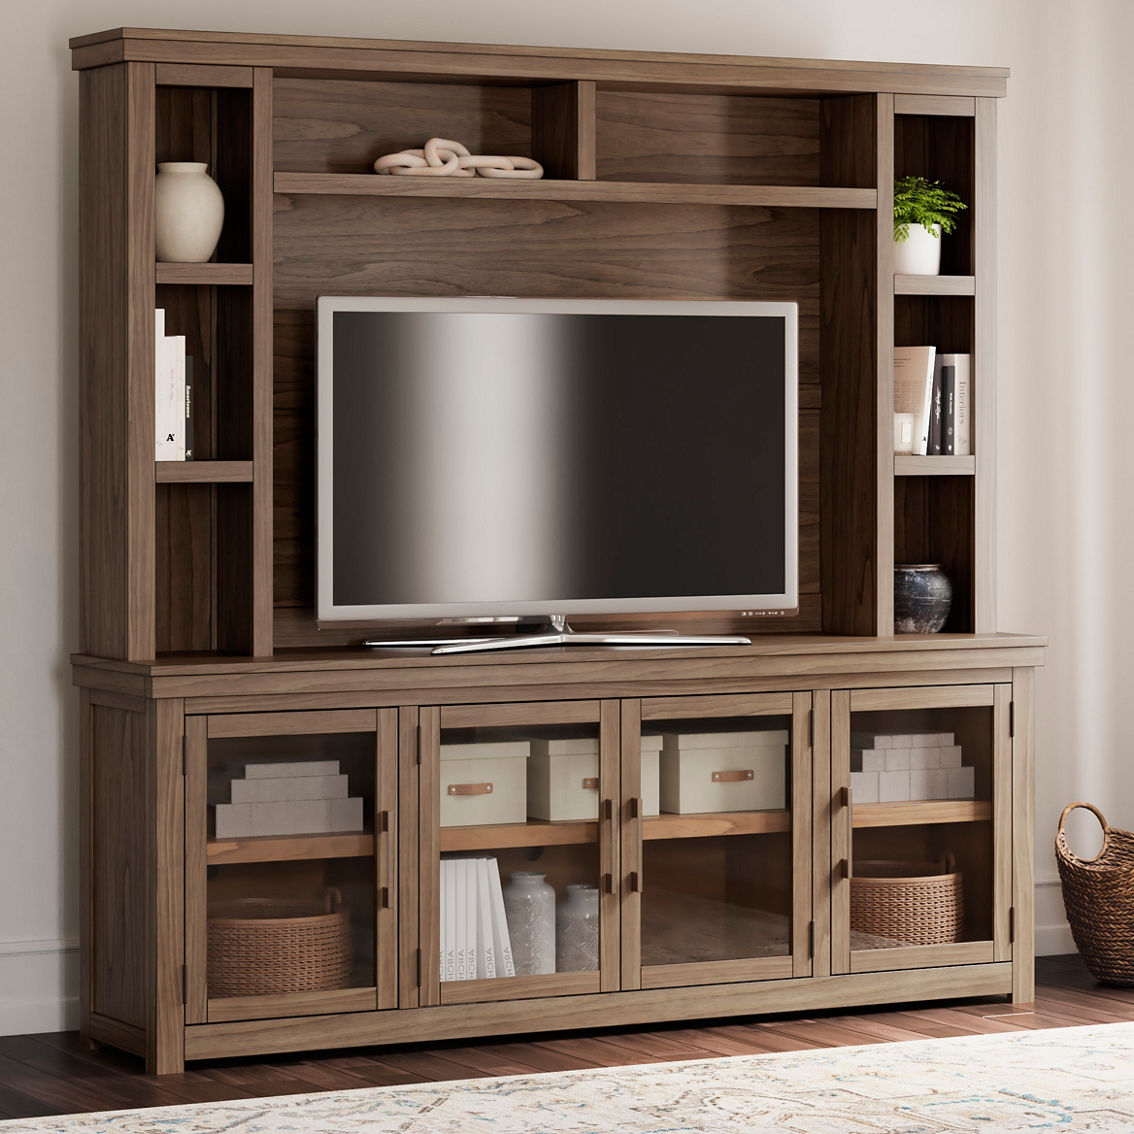 Signature Design by Ashley  Boardernest TV Stand with Hutch - Image 4 of 7